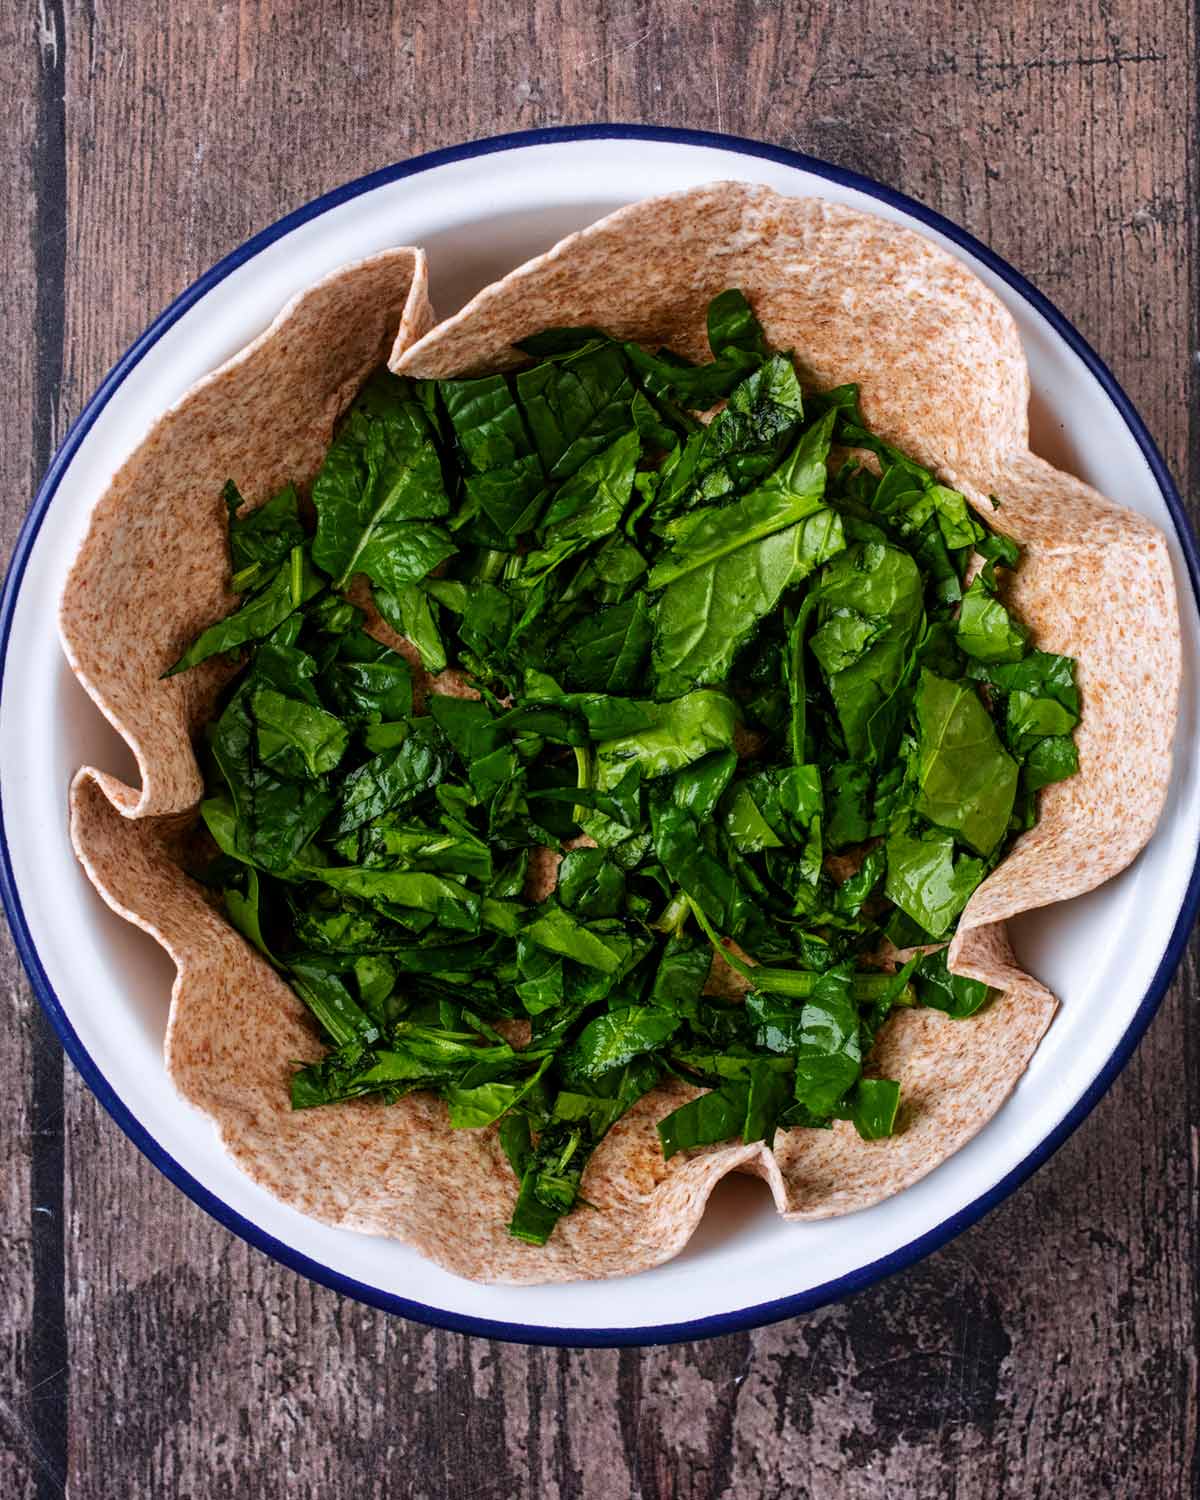 Chopped spinach added to the tortilla.